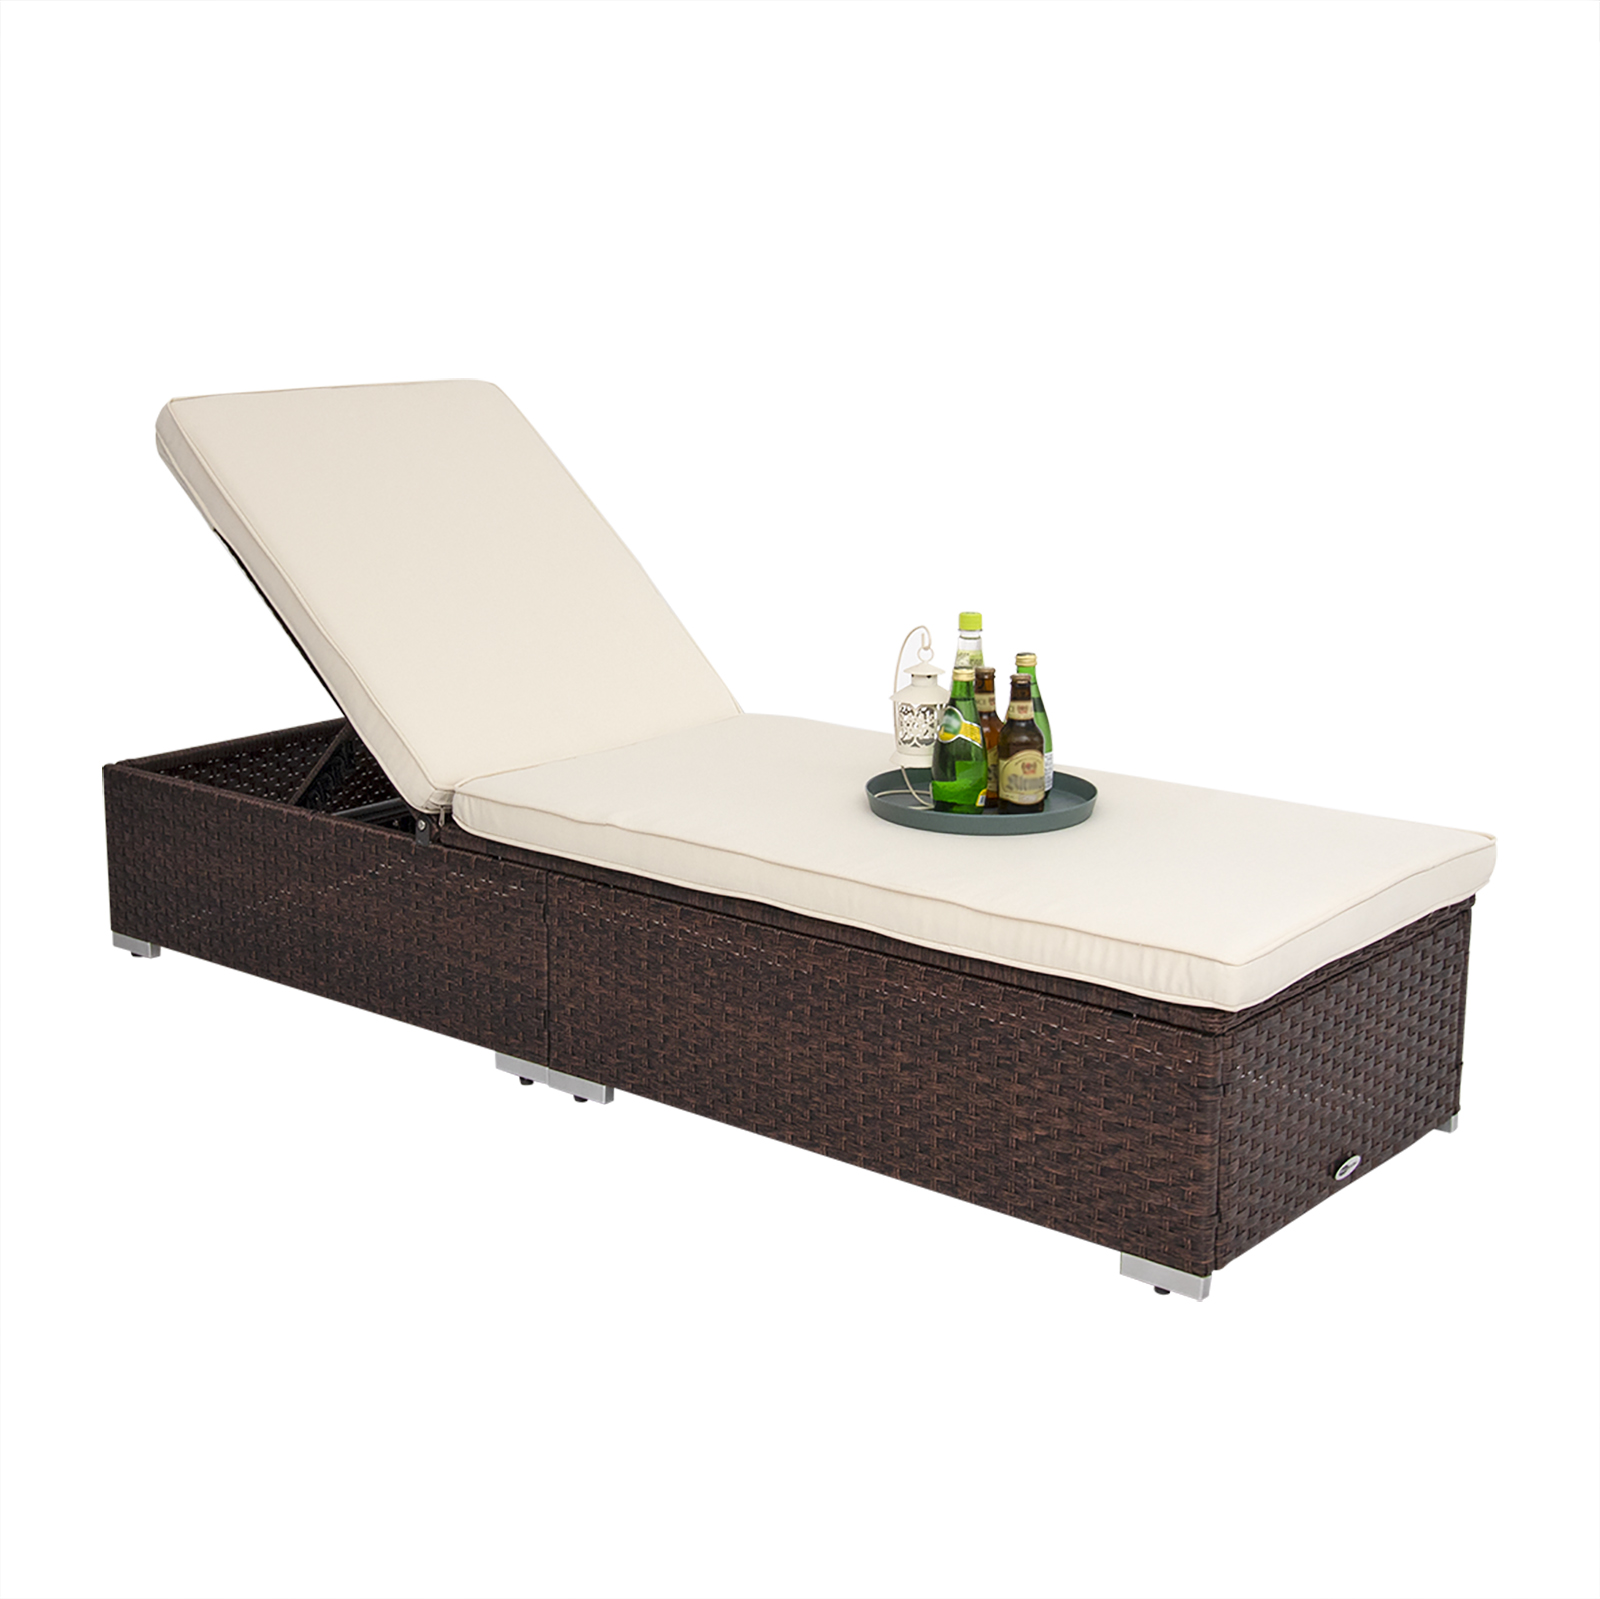 DIMAR GARDEN Outdoor Wicker Chaise Lounger, Patio Recliner Chaise with Cushion, Mixed Brown & Beige - image 4 of 8